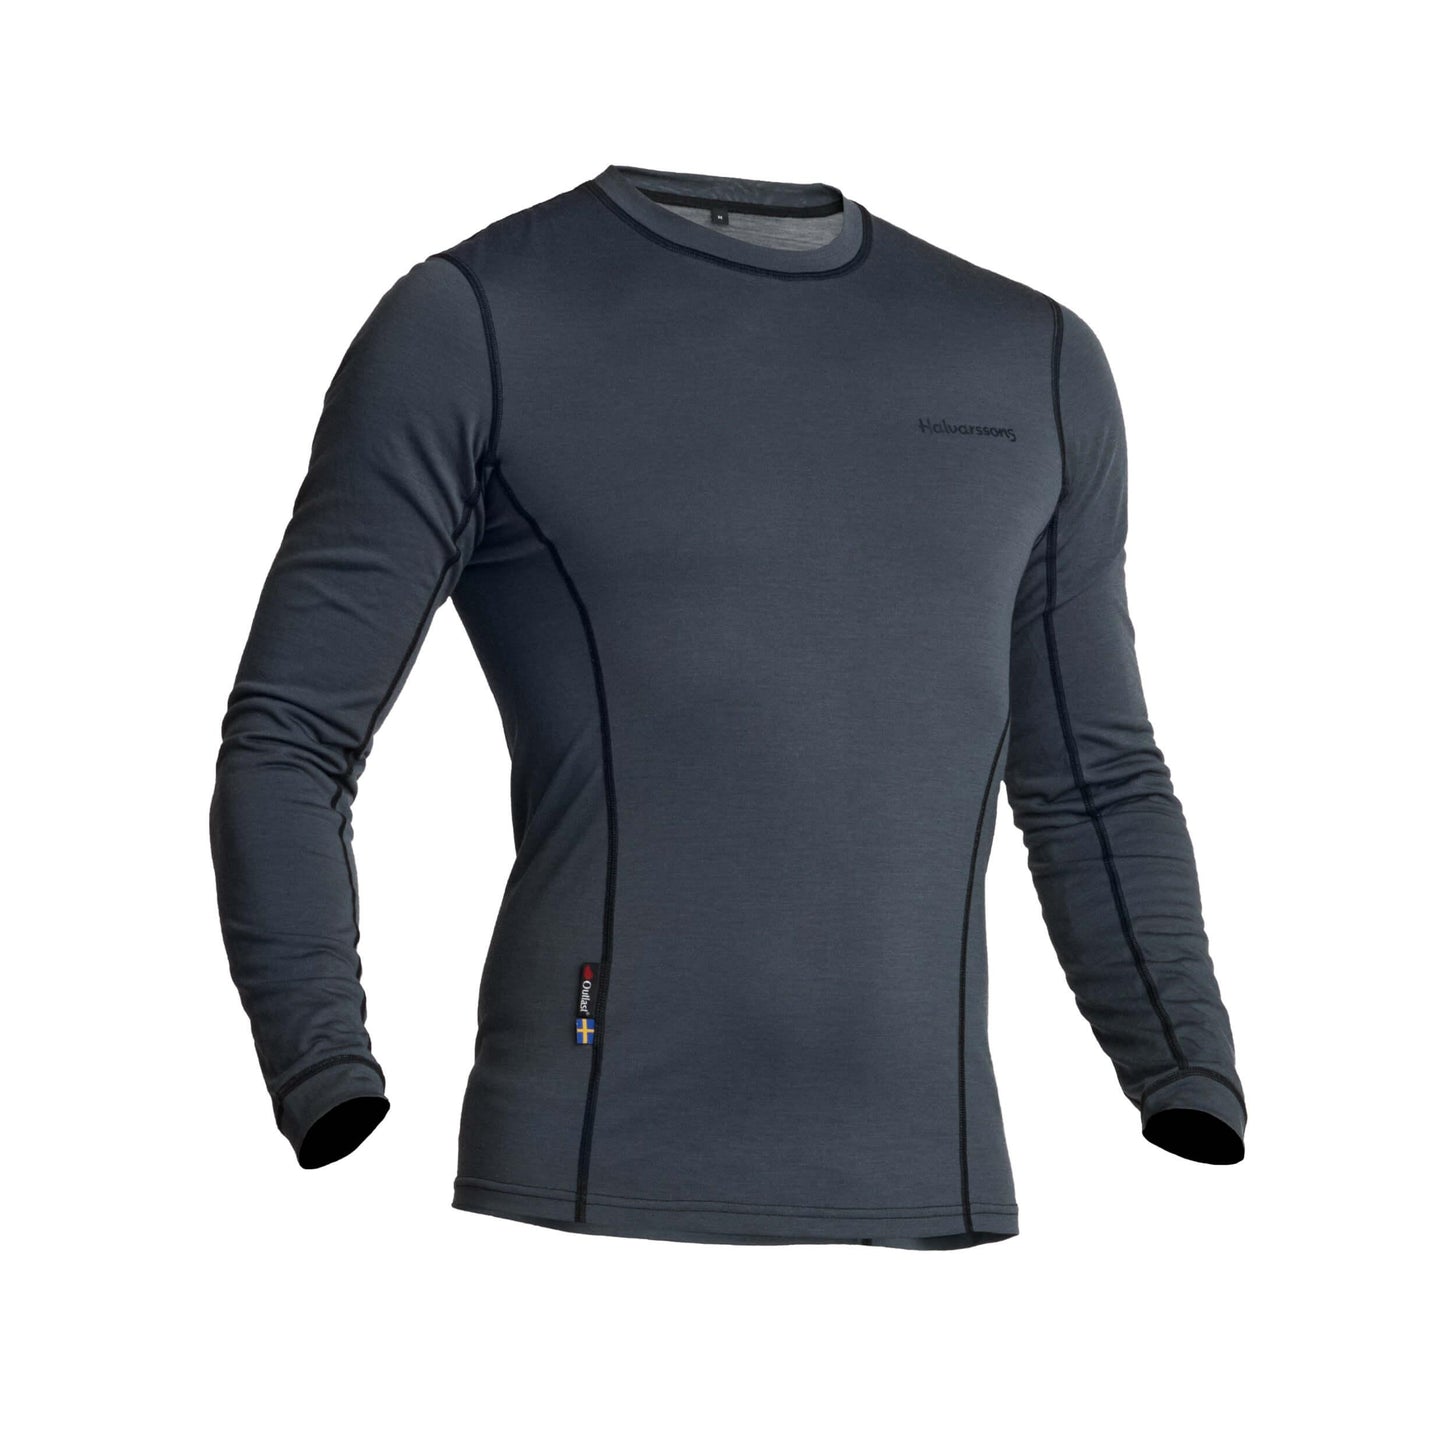 Halvarssons Comfort Sweater, lightweight technical long-sleeved wool base layer